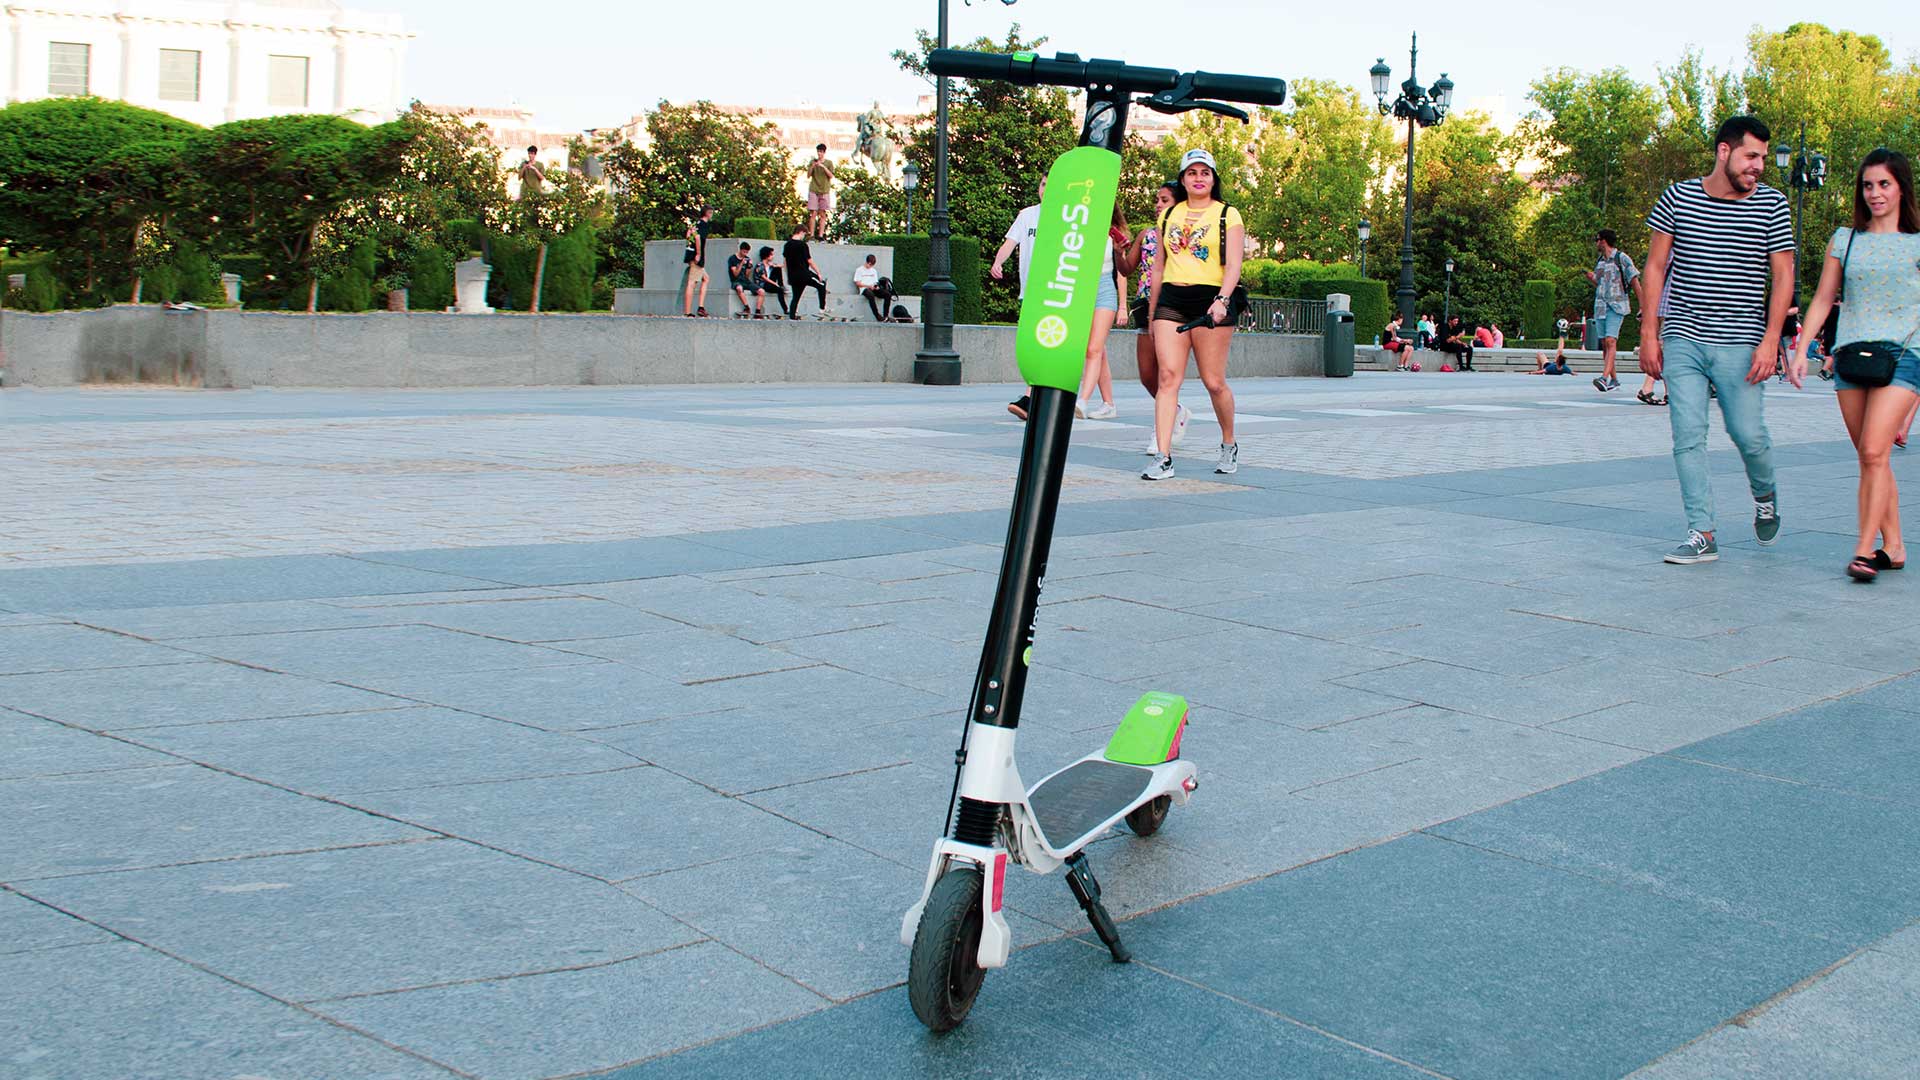 Electric-Scooter-Unsure-Why-it-Was-Programmed-to-Feel-Pain.jpg